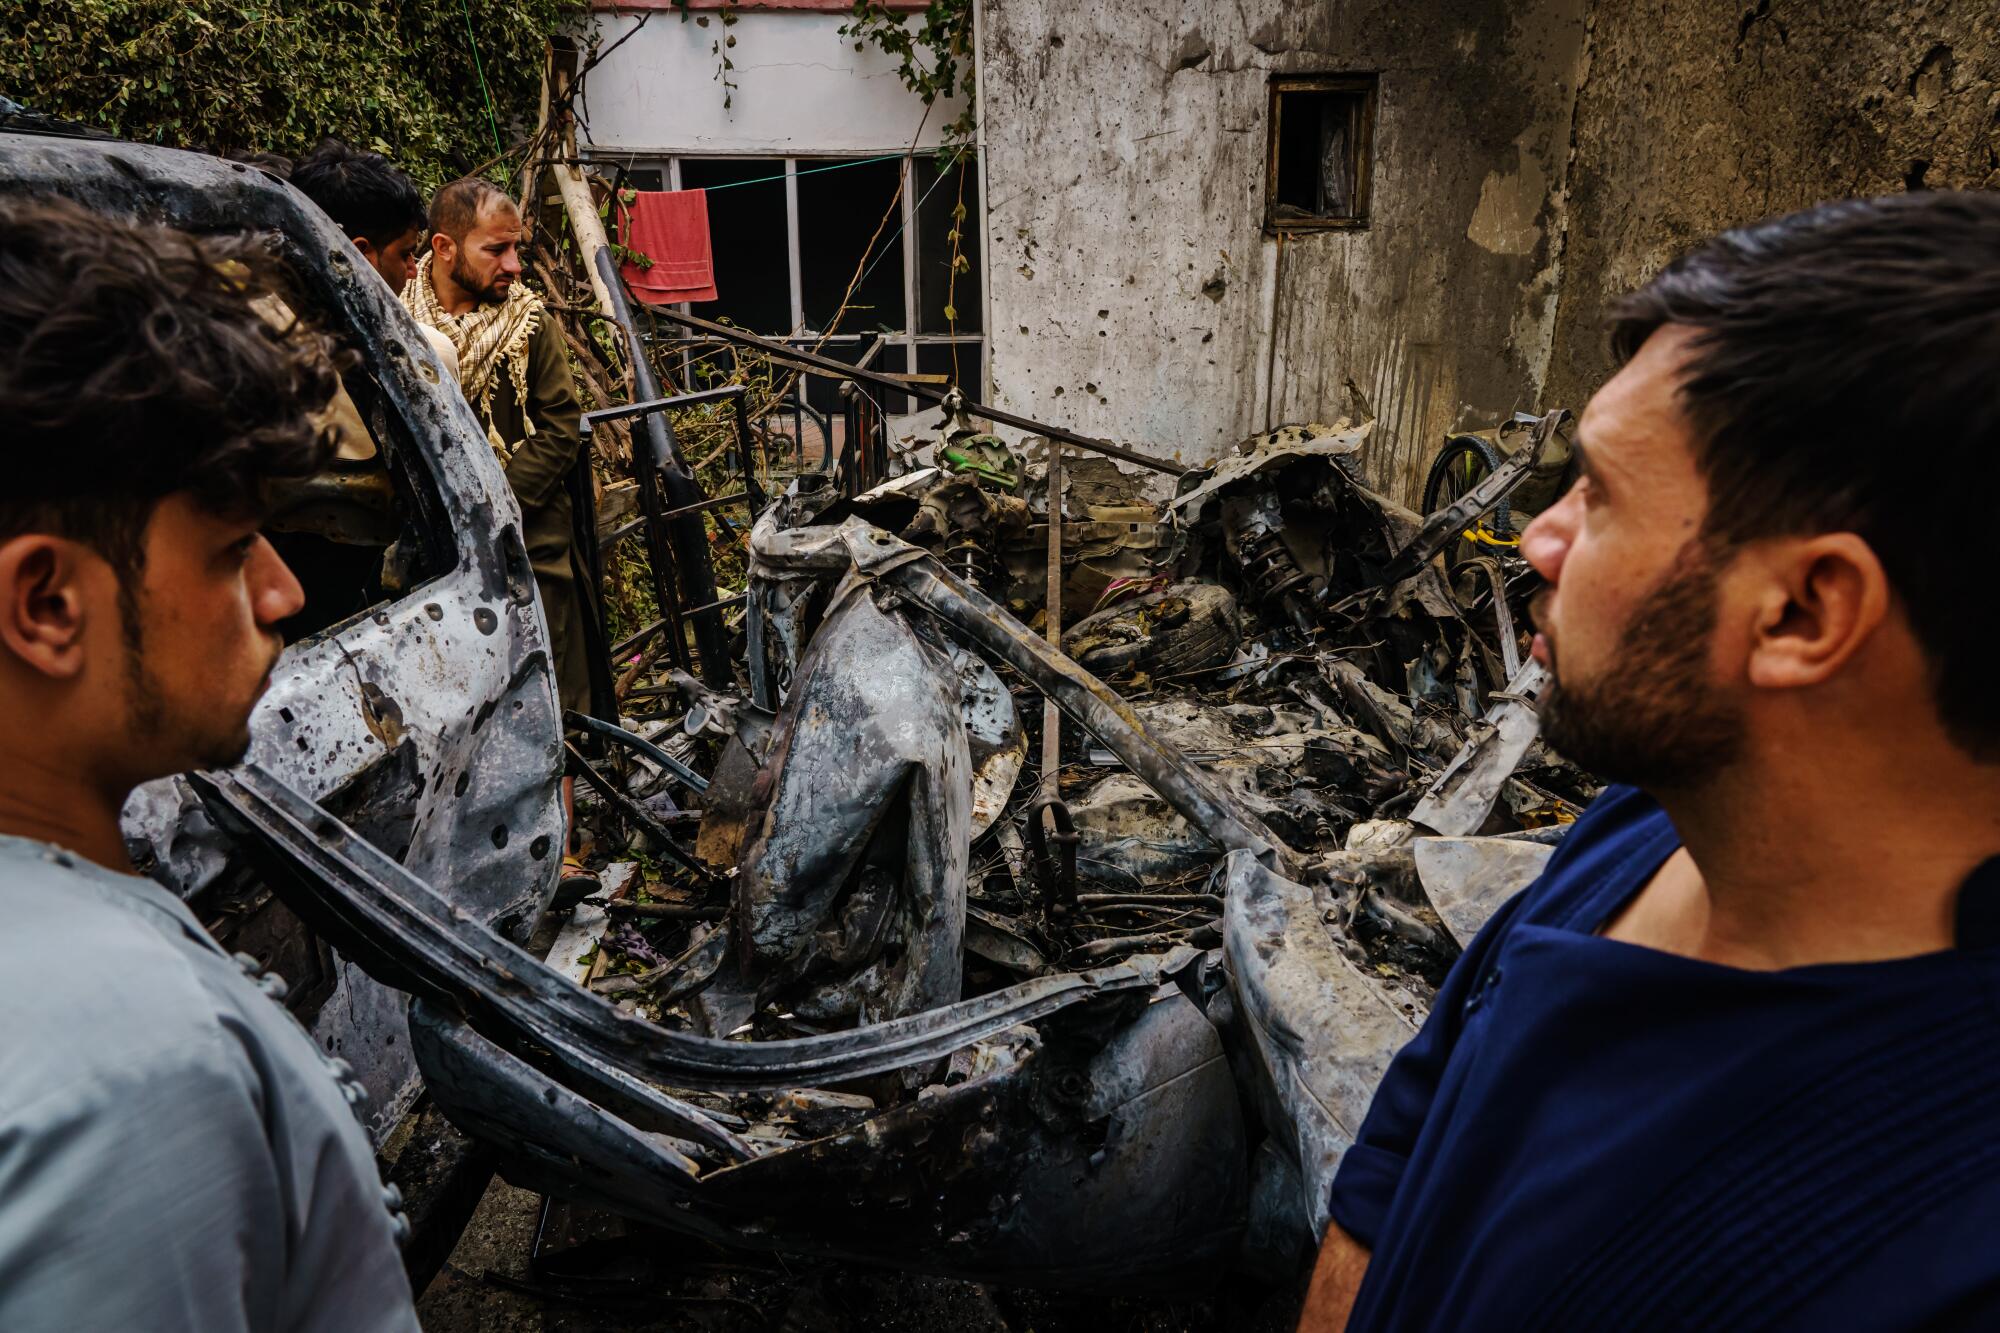 Relatives and neighbors of the Ahmadi family gather around the incinerated husk of a vehicle.